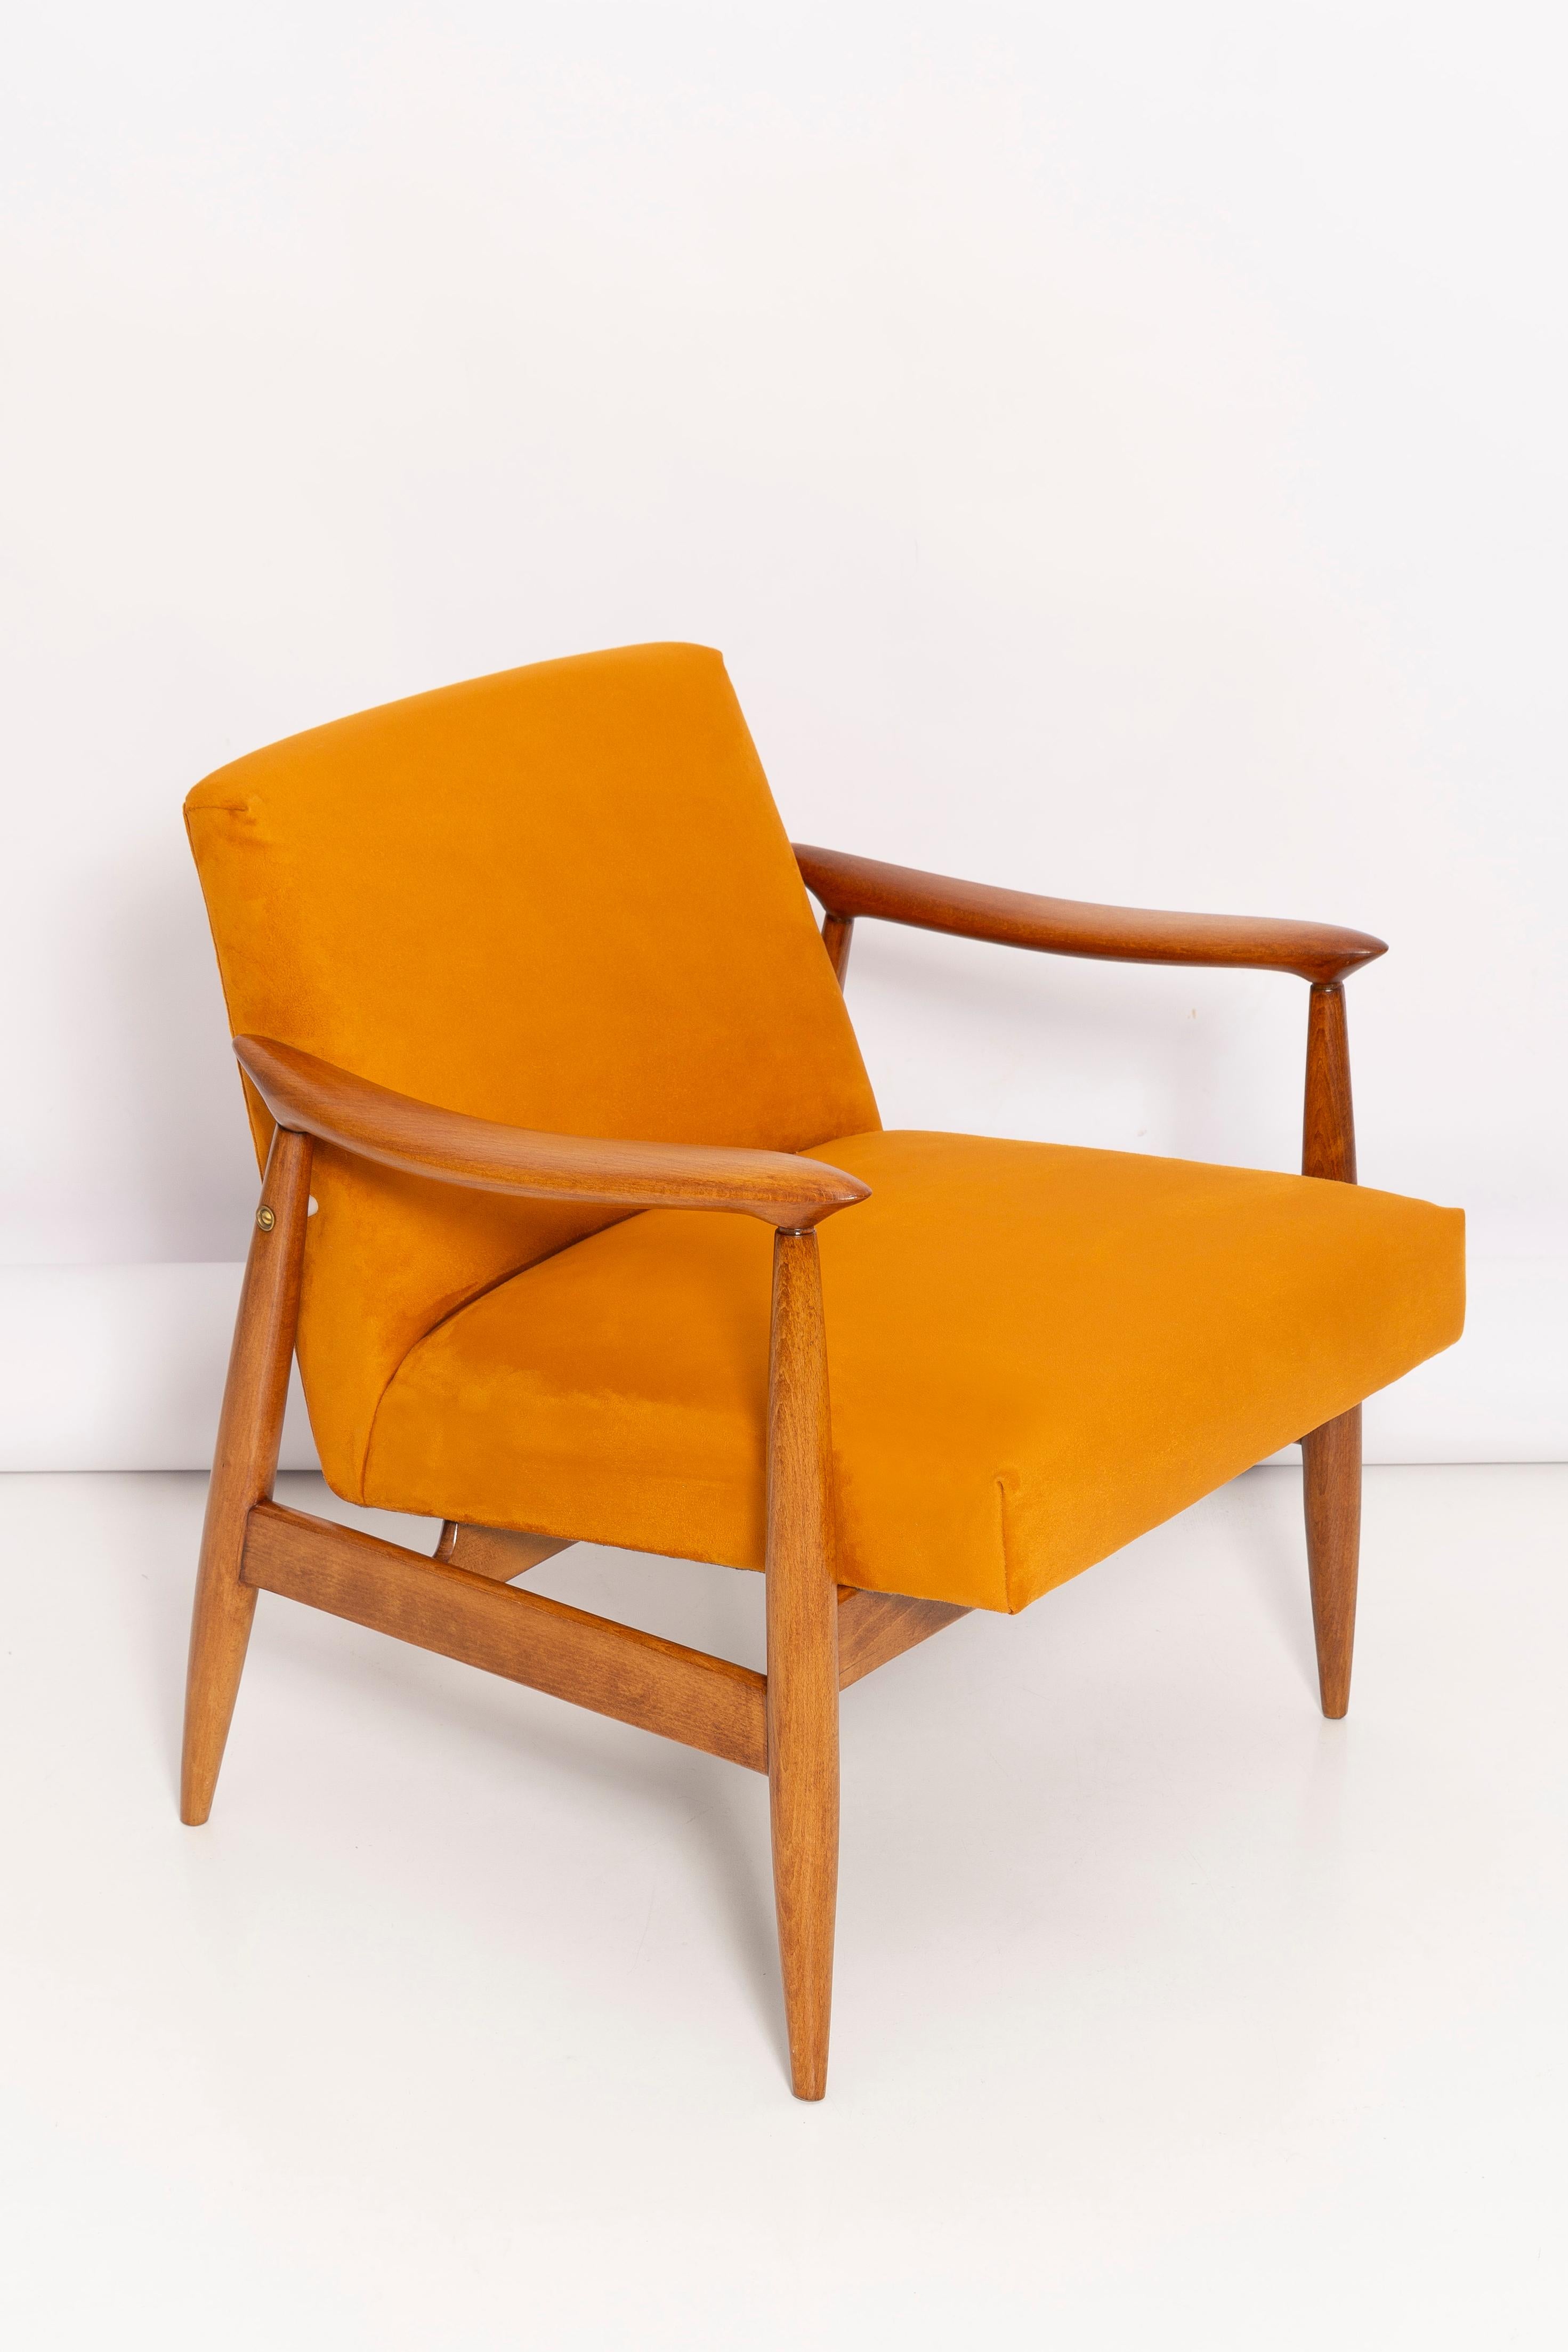 The GFM armchair is an icon of the Polish design of the PRL period.

The famous armchair was designed in 1962 by the Polish interior designer and furniture designer 
Edmund Homa. Produced in the Lower Silesian Furniture Factory in